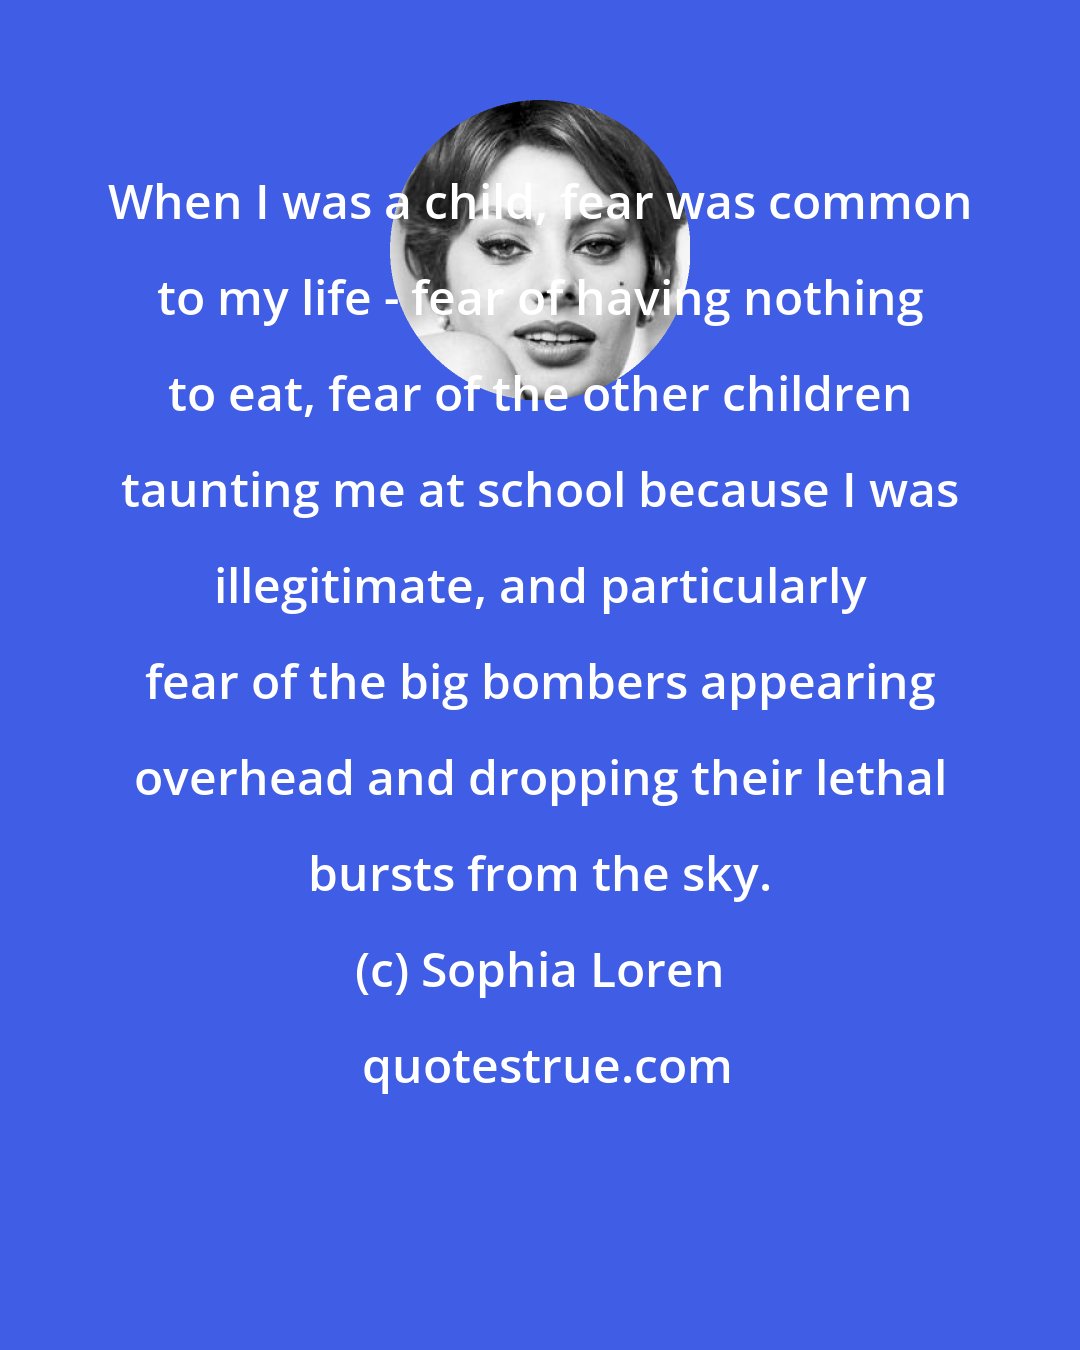 Sophia Loren: When I was a child, fear was common to my life - fear of having nothing to eat, fear of the other children taunting me at school because I was illegitimate, and particularly fear of the big bombers appearing overhead and dropping their lethal bursts from the sky.